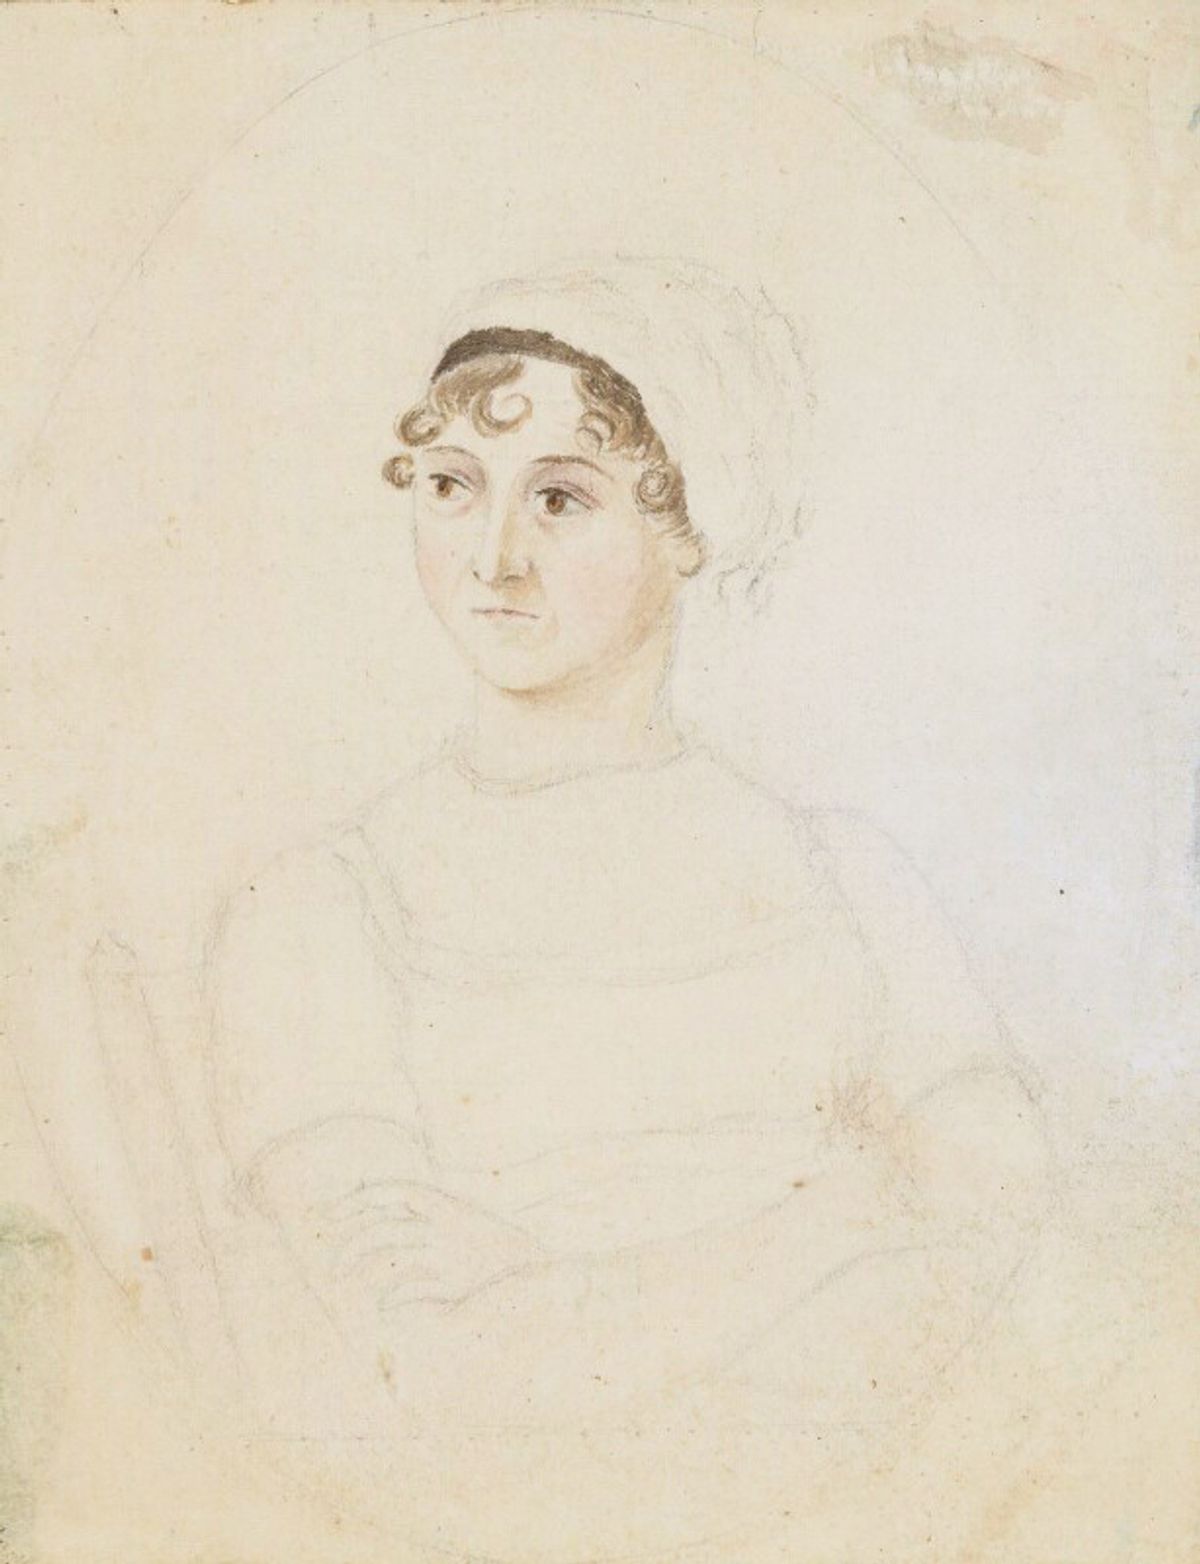 Portrait of Jane Austen by her sister Cassandra (around 1810). An image based on the drawing now appears on £10 notes © National Portrait Gallery, London